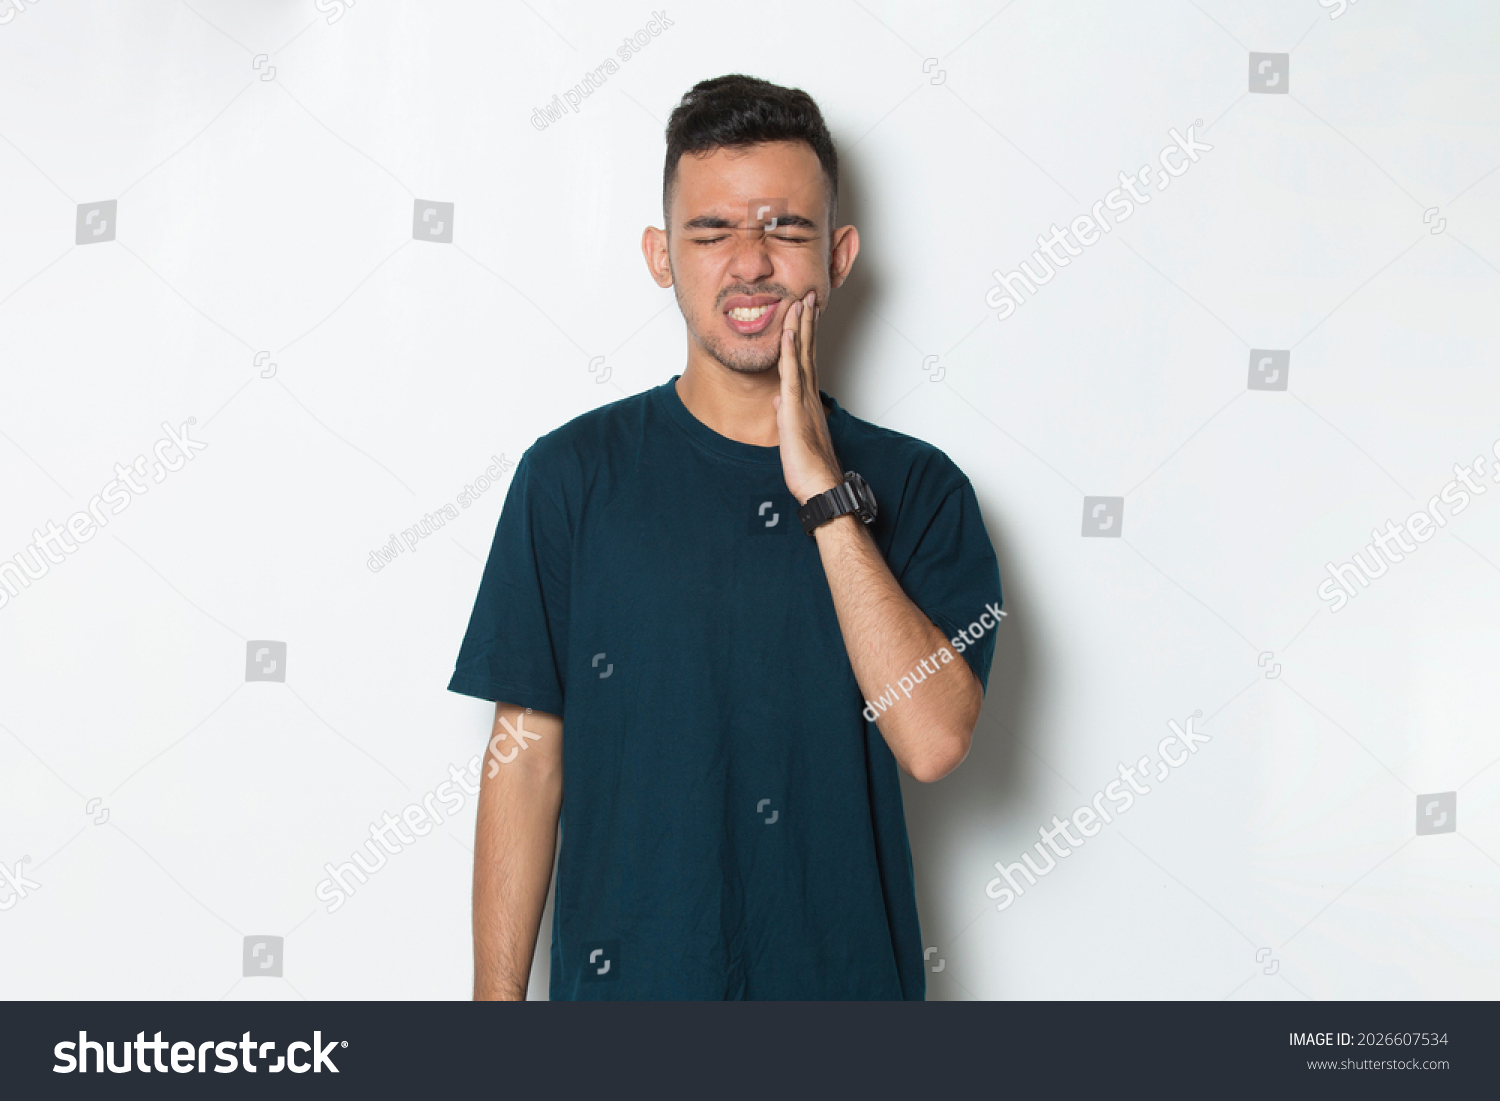 man with toothache; portrait of man suffering from toothache pain, tooth decay, tooth sensitivity; oral health care, dental care concept on white background
 #2026607534